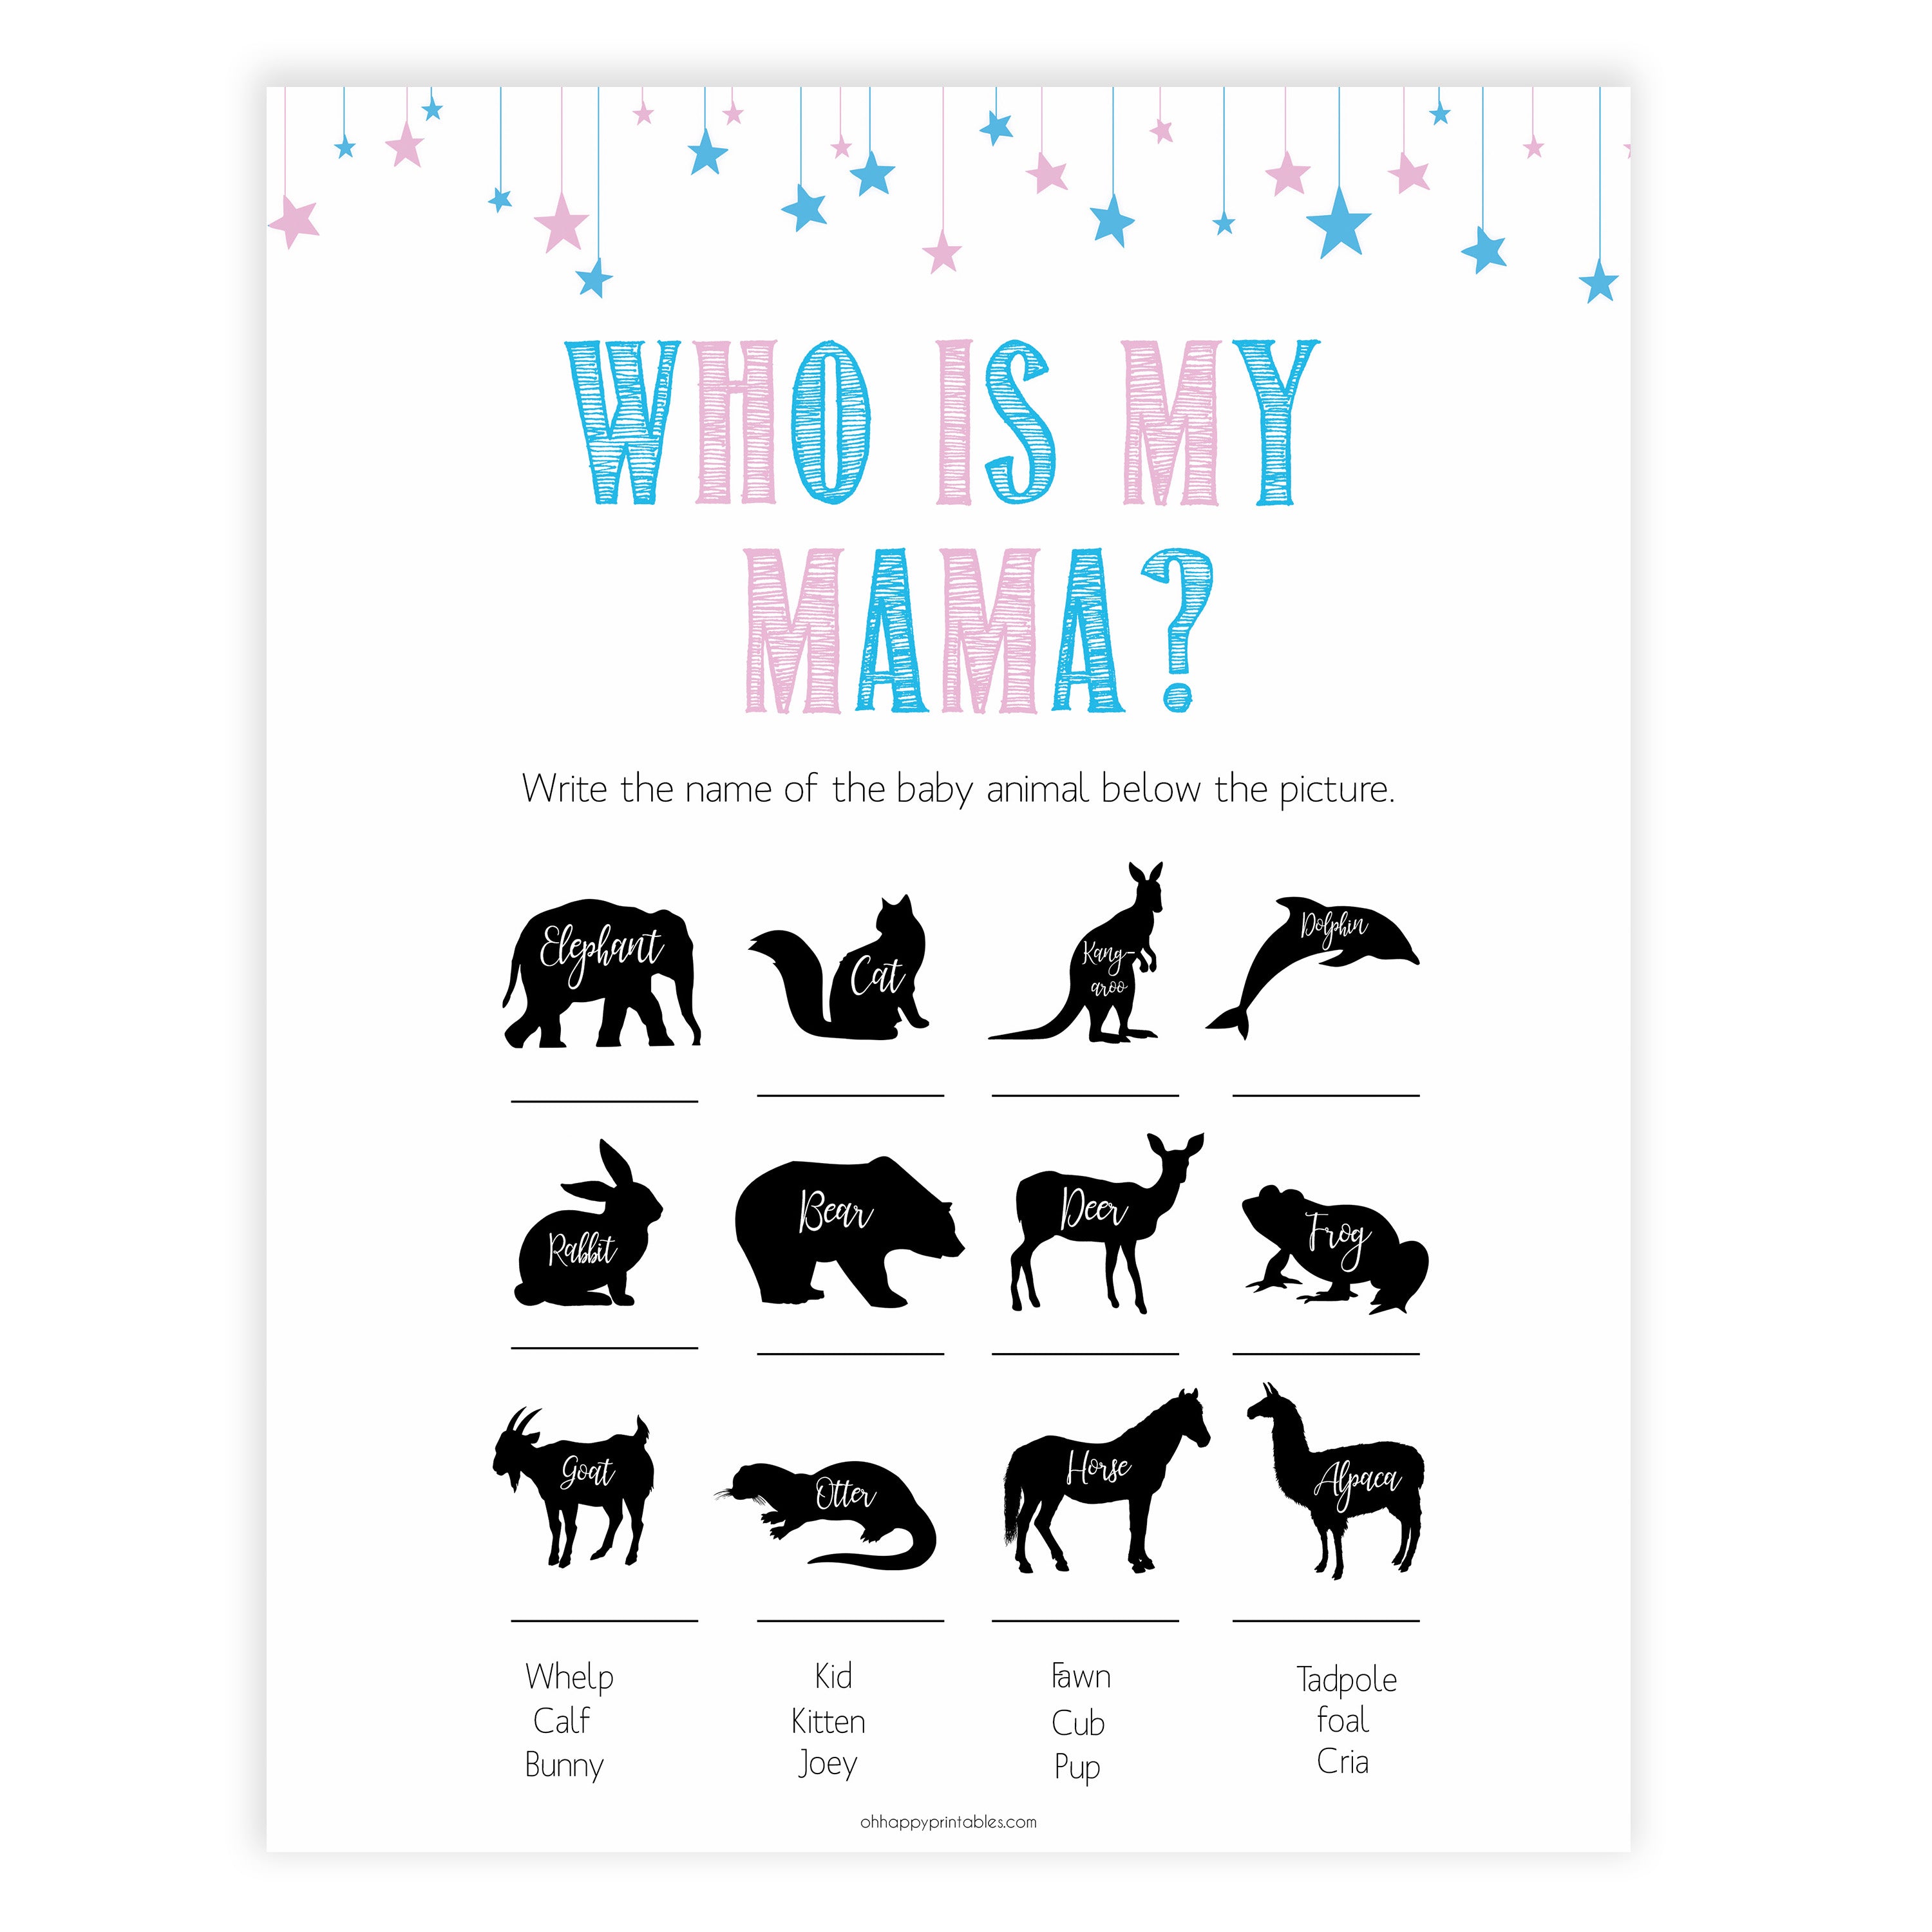 Gender reveal baby games, who is my mama baby game, gender reveal shower, fun baby games, gender reveal ideas, popular baby games, best baby games, printable baby games, gender reveal baby games